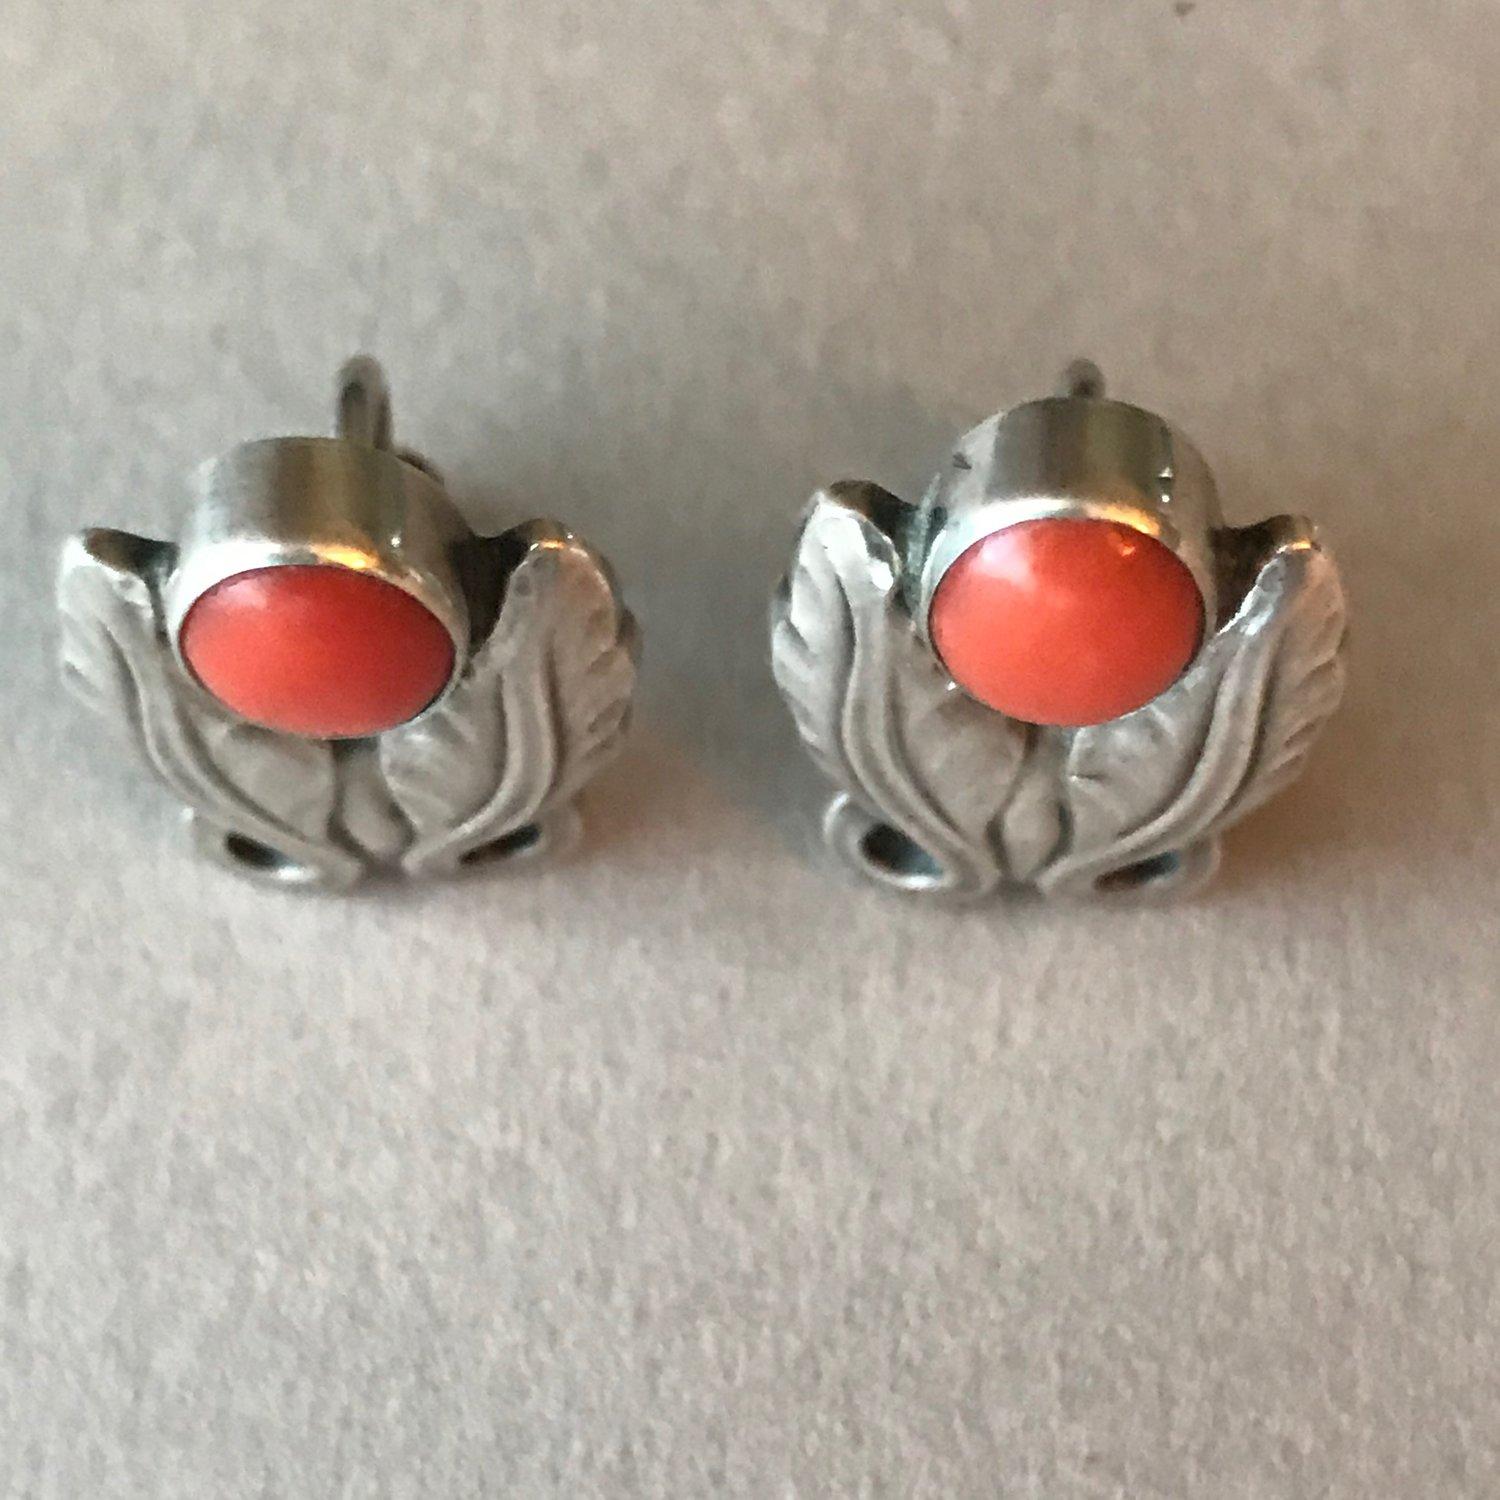 Georg Jensen Sterling Silver Foliate Earrings No. 108 with Coral In Good Condition For Sale In San Francisco, CA